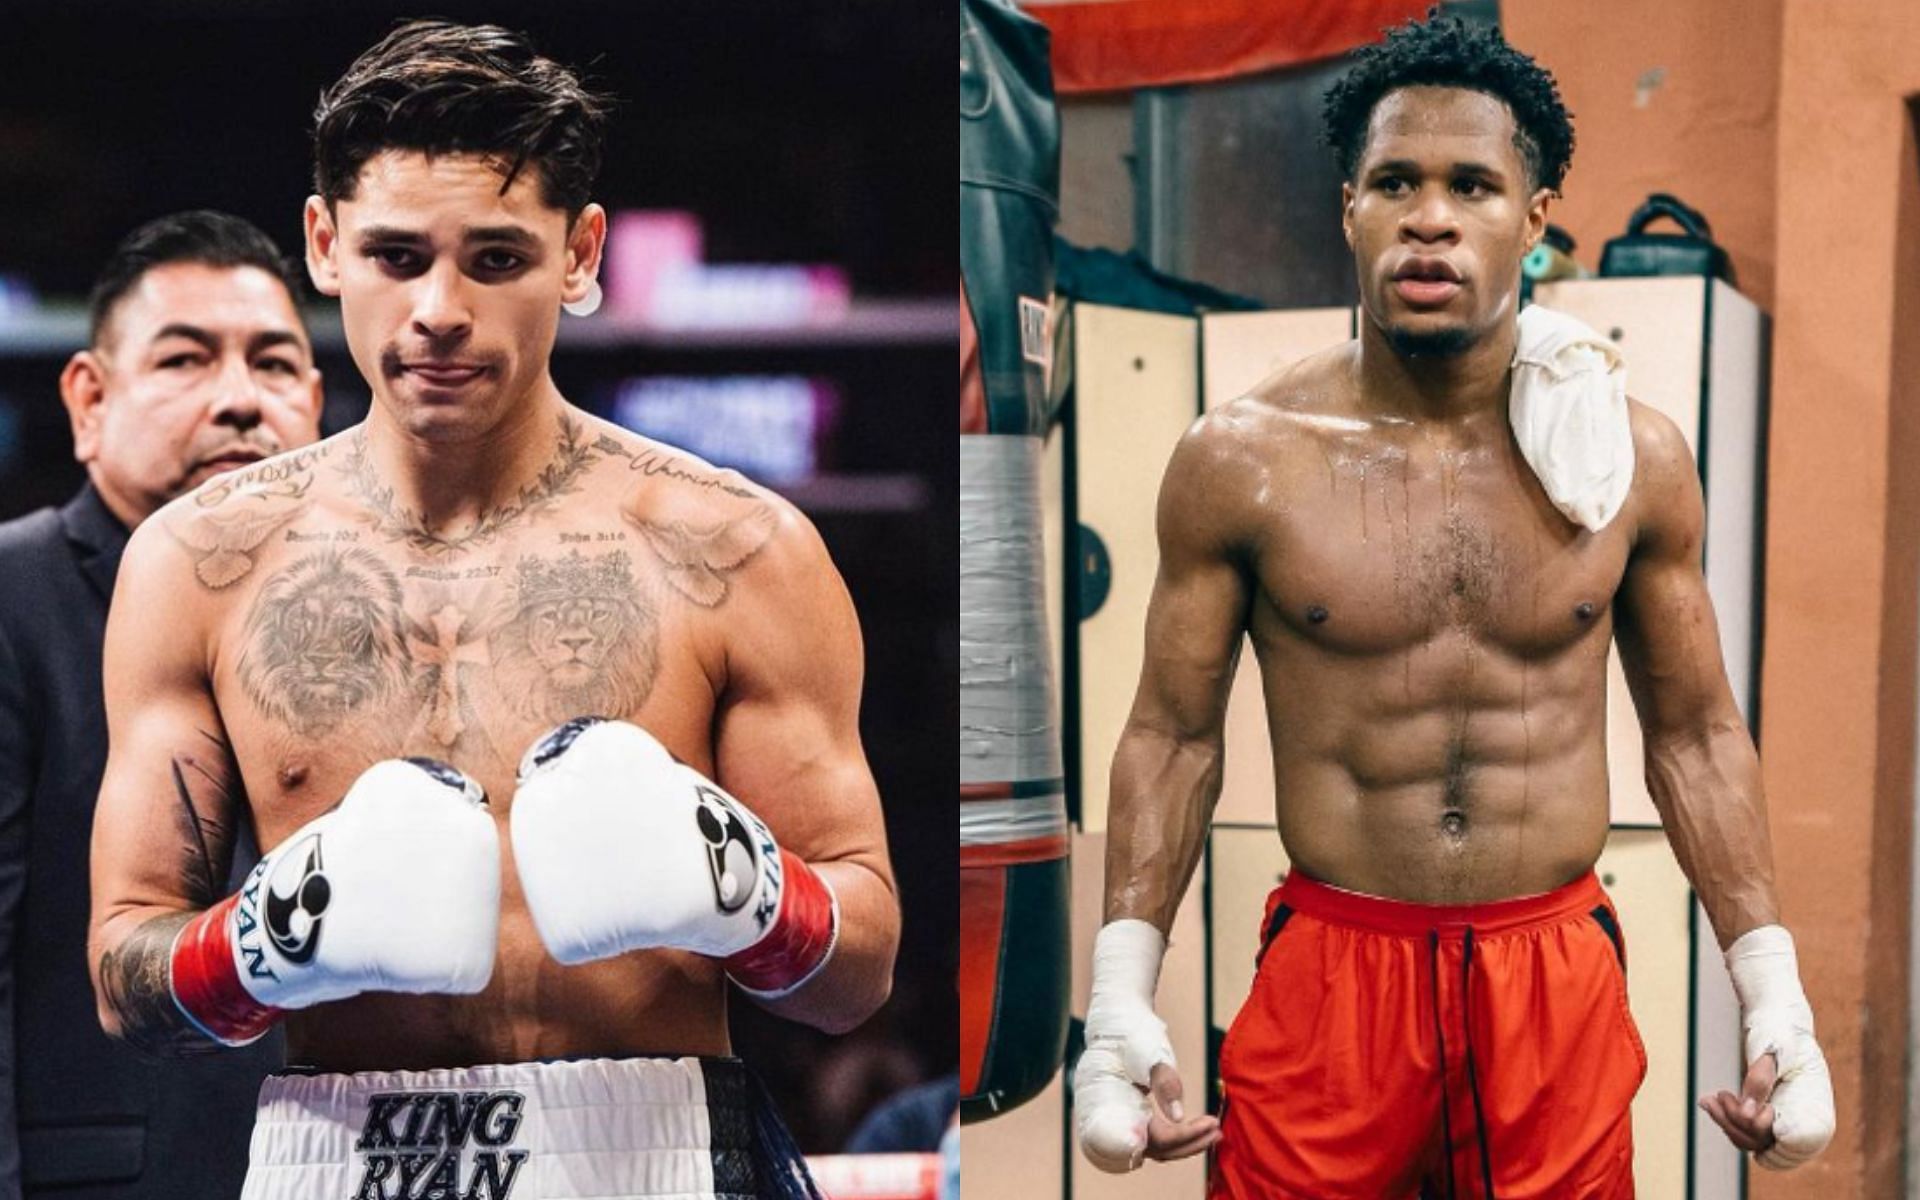 Ryan Garcia (left) explains why Devin Haney (right) fight is no longer an option [Images Courtesy: @realdevinhaney and @kingryan on Instagram]